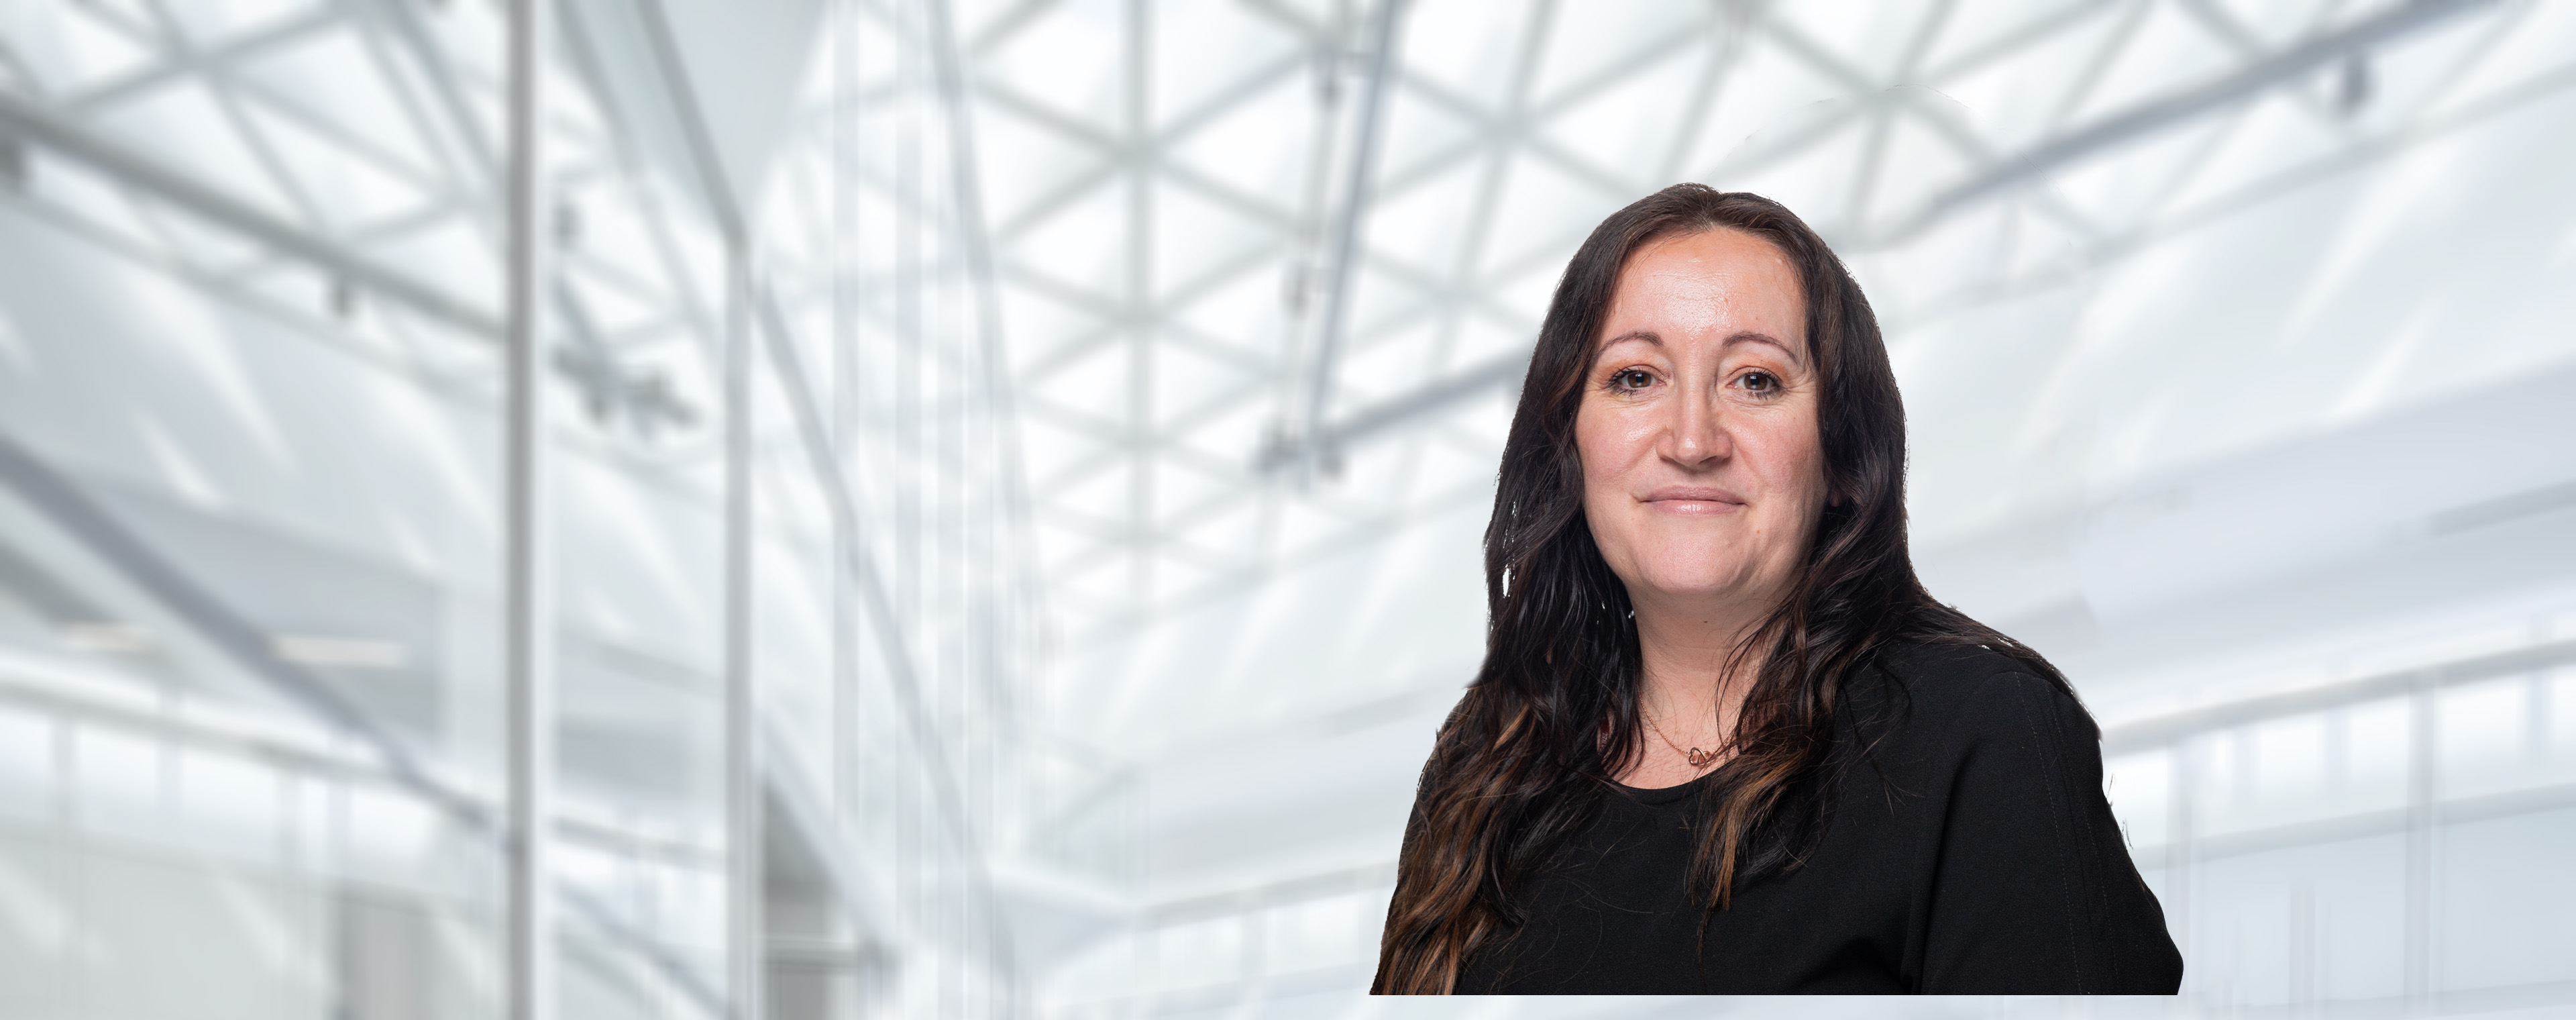 Leanne McConnachie | IT Operations Manager